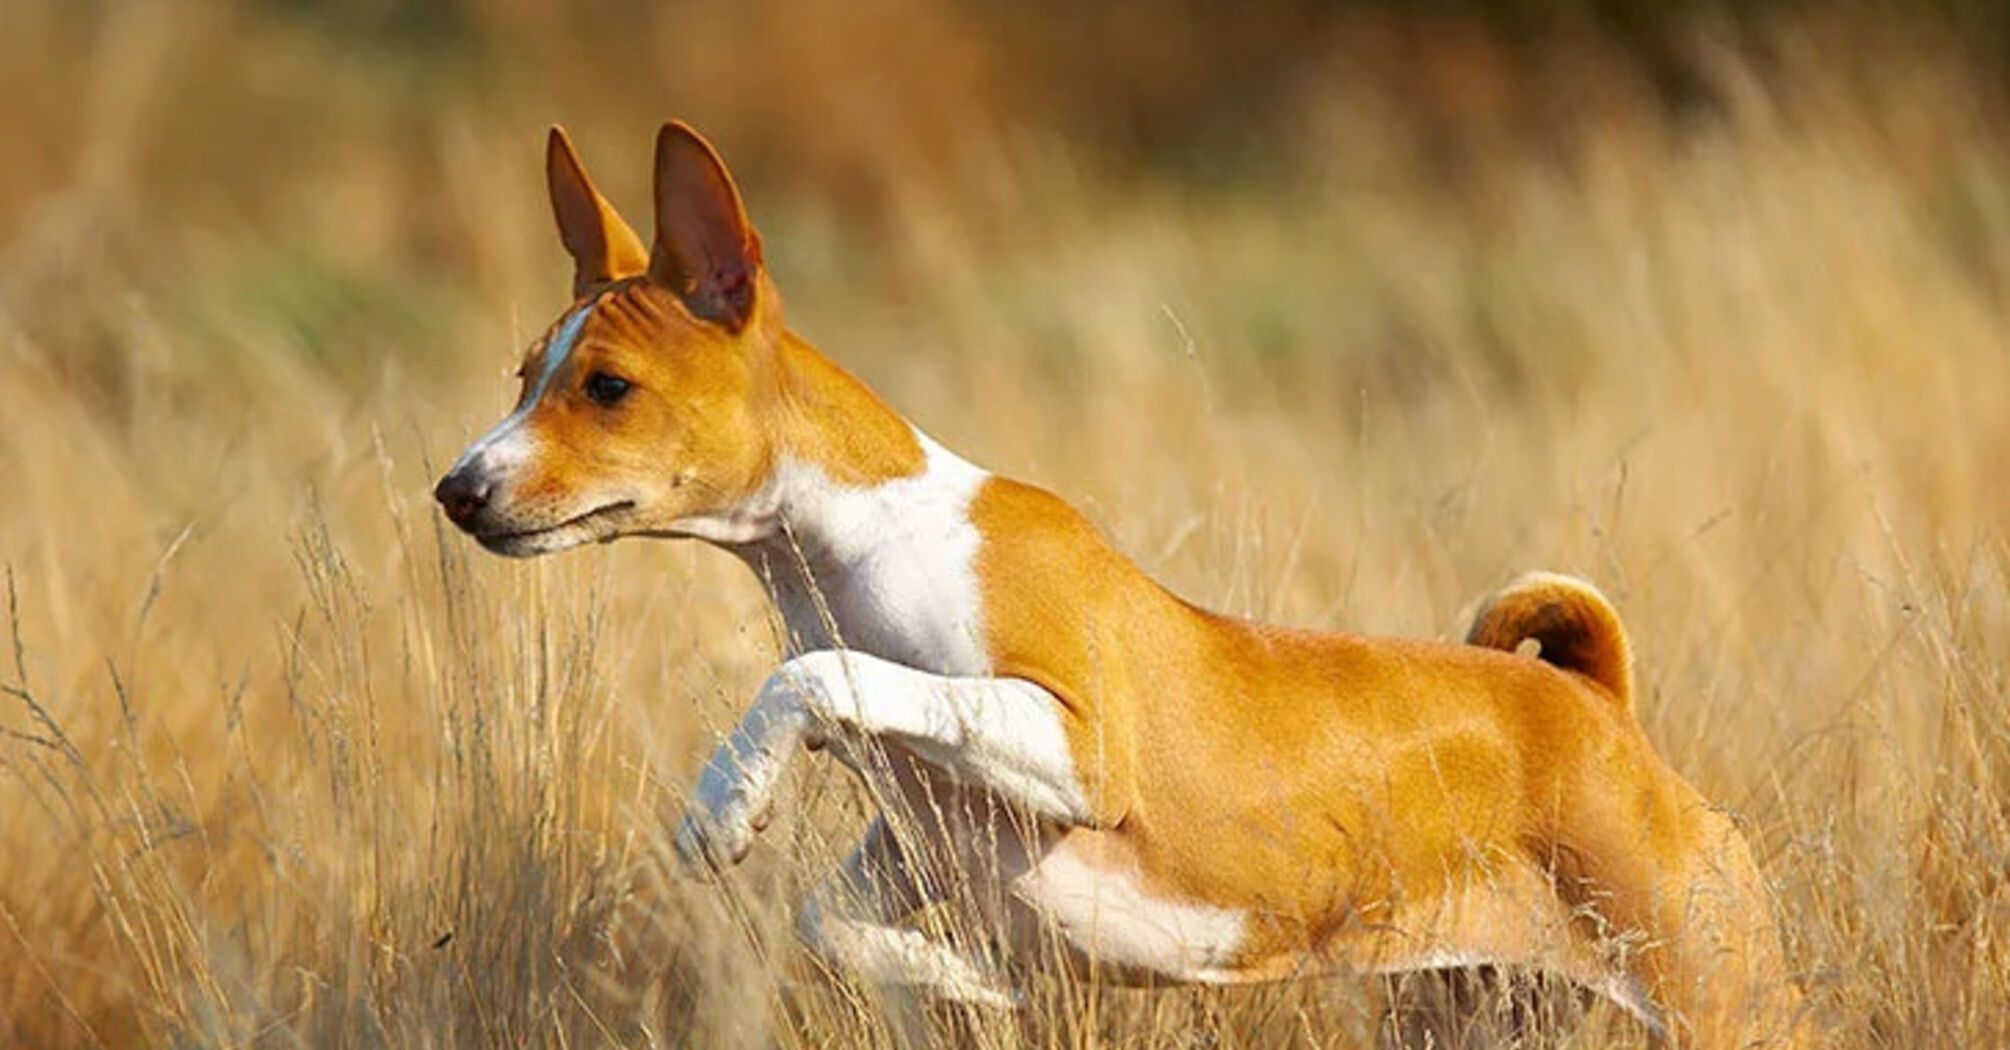 Features of the Basenji dog breed